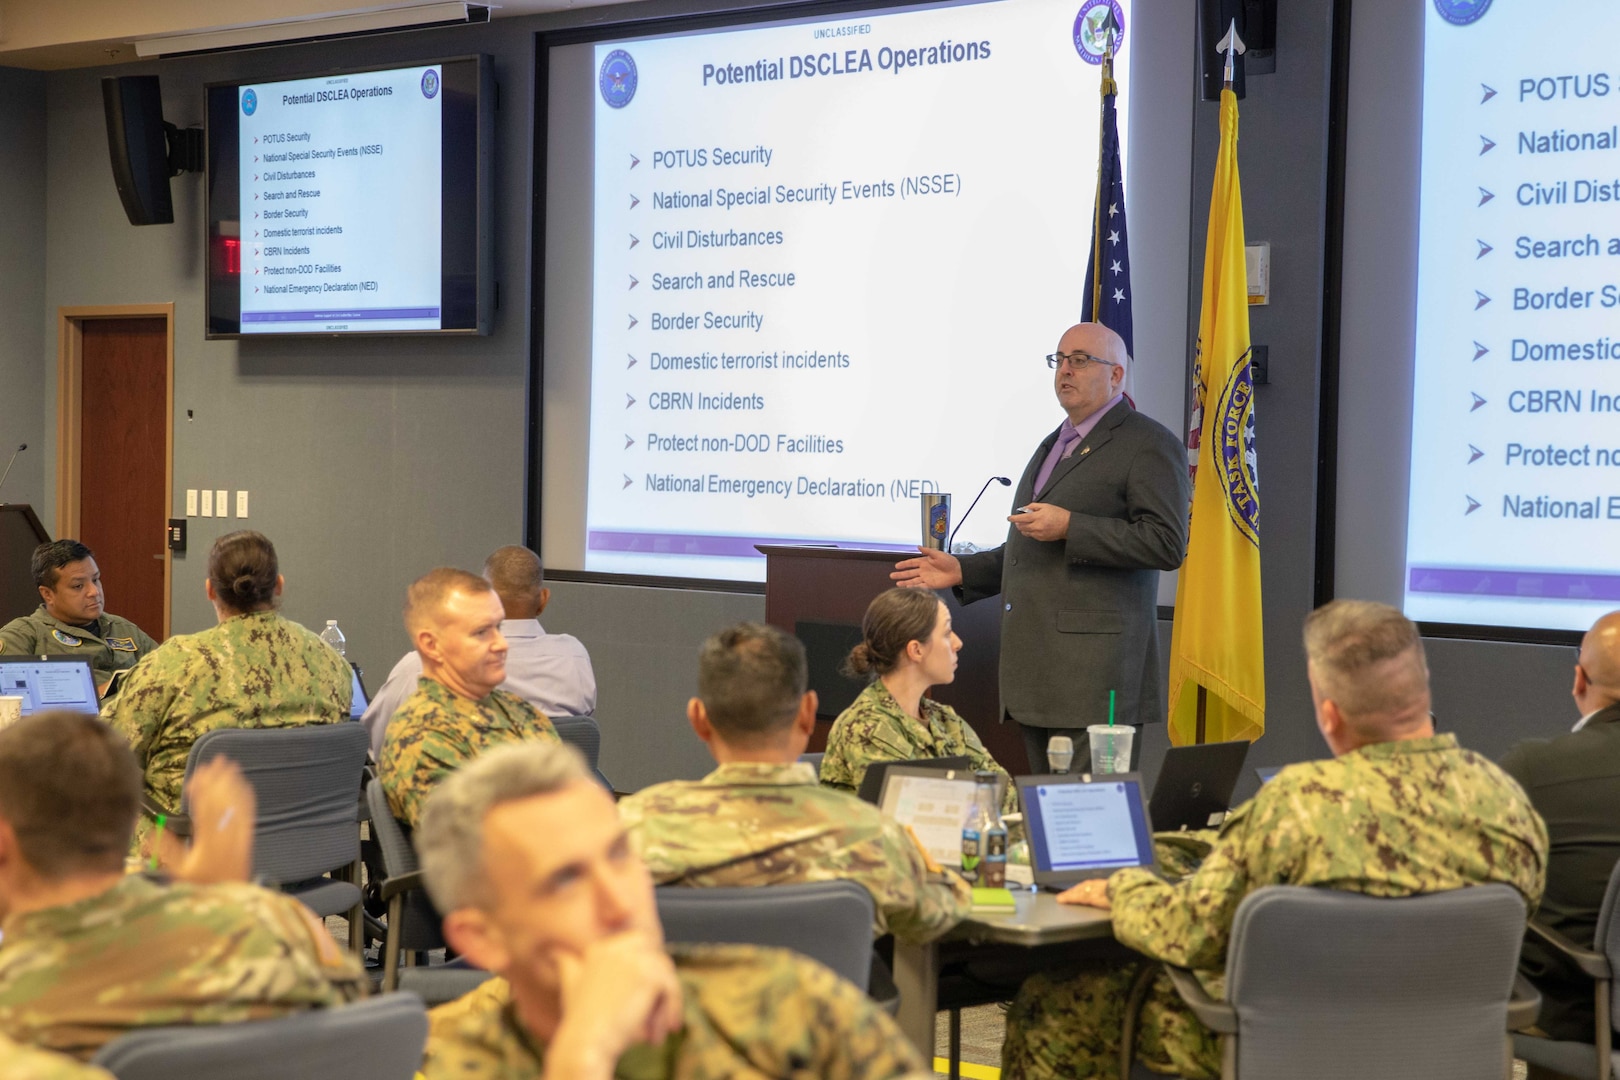 Mr. Sean Francis, Defense Support of Civil Support Authorities (DSCA) course instructor from Army North (ARNORTH), speaks to students from the DCSA II course. The course was held July 16-19 and educated 62 members of the United States military and other federal agencies in planning, coordinating, executing and supporting DSCA operations.  The course is administered in three distinct phases: Phase I is an 8-hour distance learning preparatory course, Phase II is a 3.5 day resident course, and Phase III is continuing education through alumni updates. (Official DoD photo by Mass Communication Specialist 3rd Class Michael Redd/released)